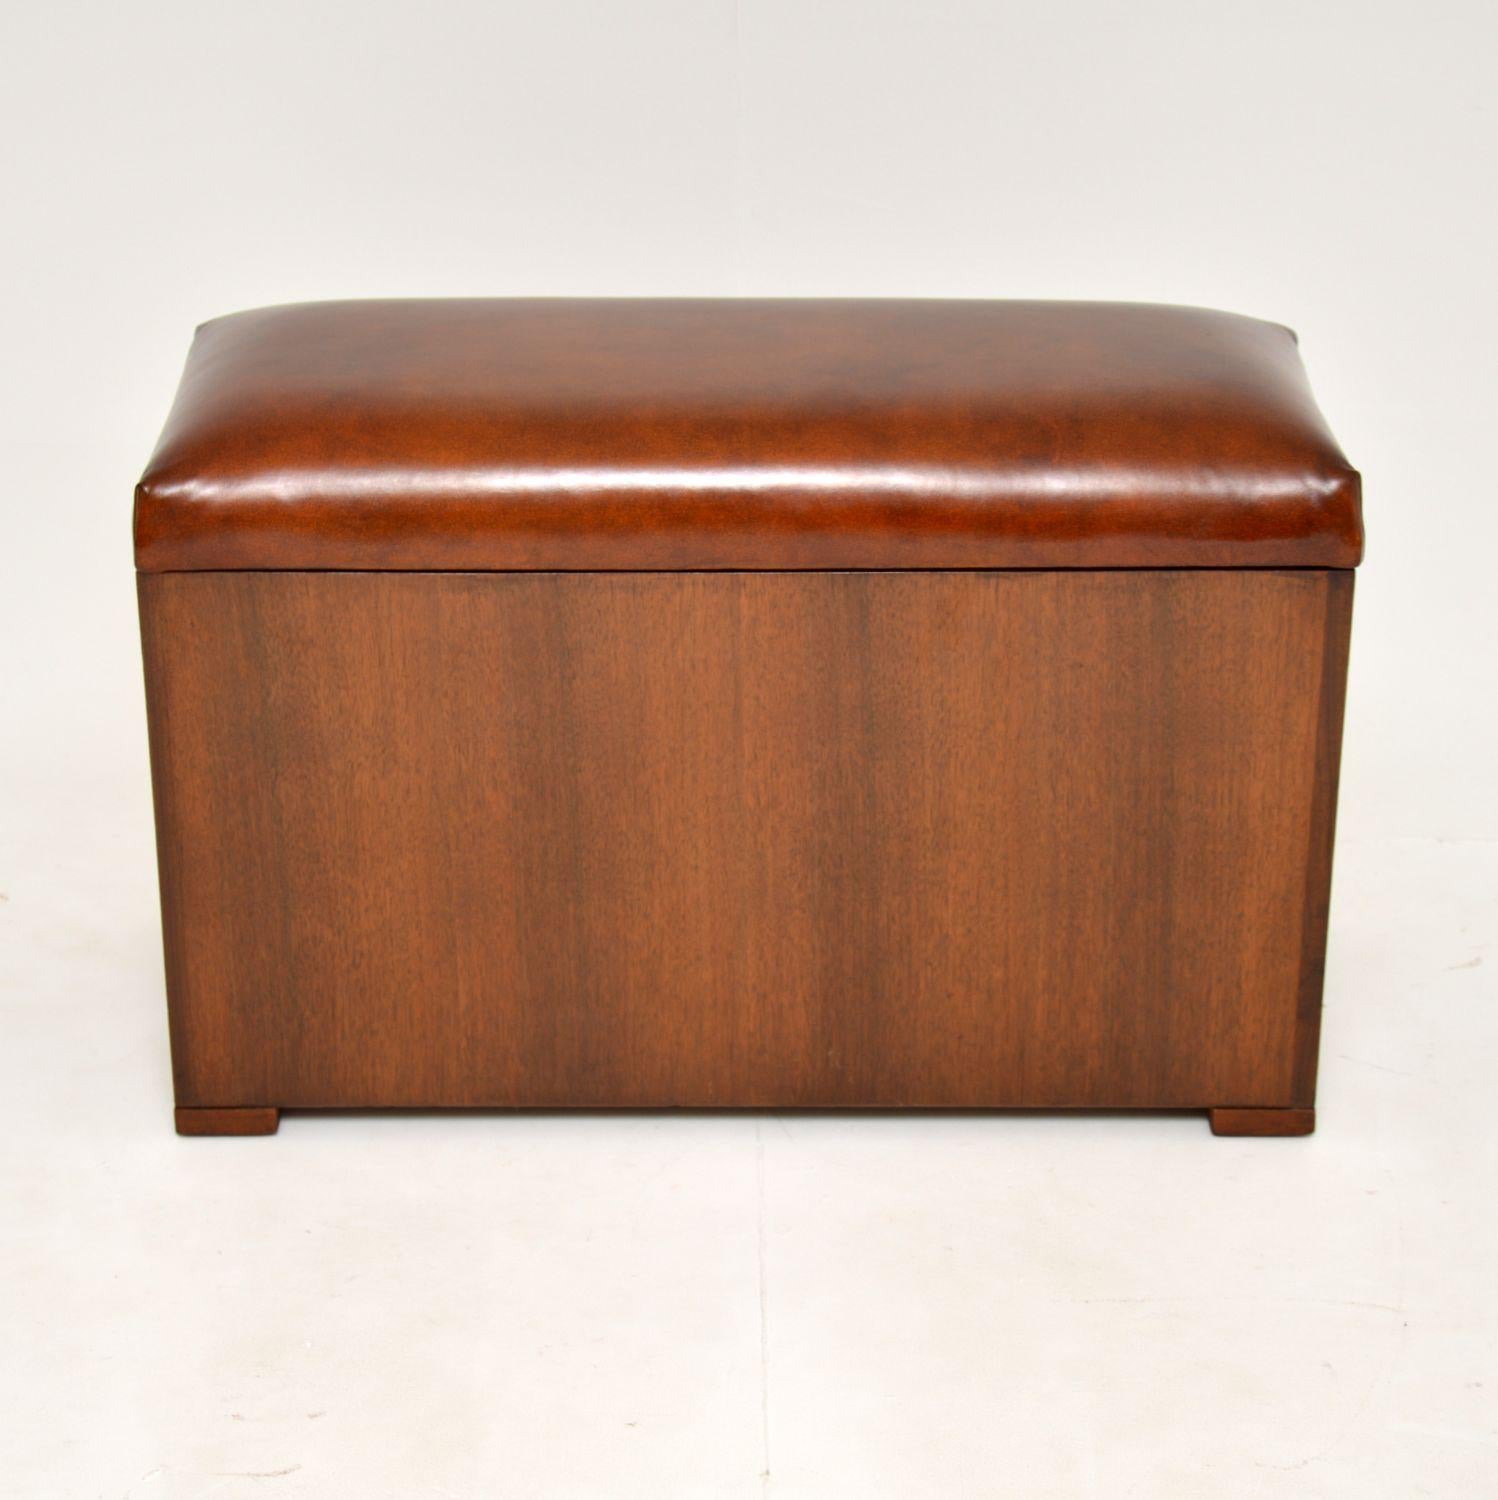 A smart and very useful storage ottoman with a leather top, made in England and dating from around the 1950’s.

It is a great size and is very practical, with plenty of storage & brass inset military handles. This would be perfect as an entry way